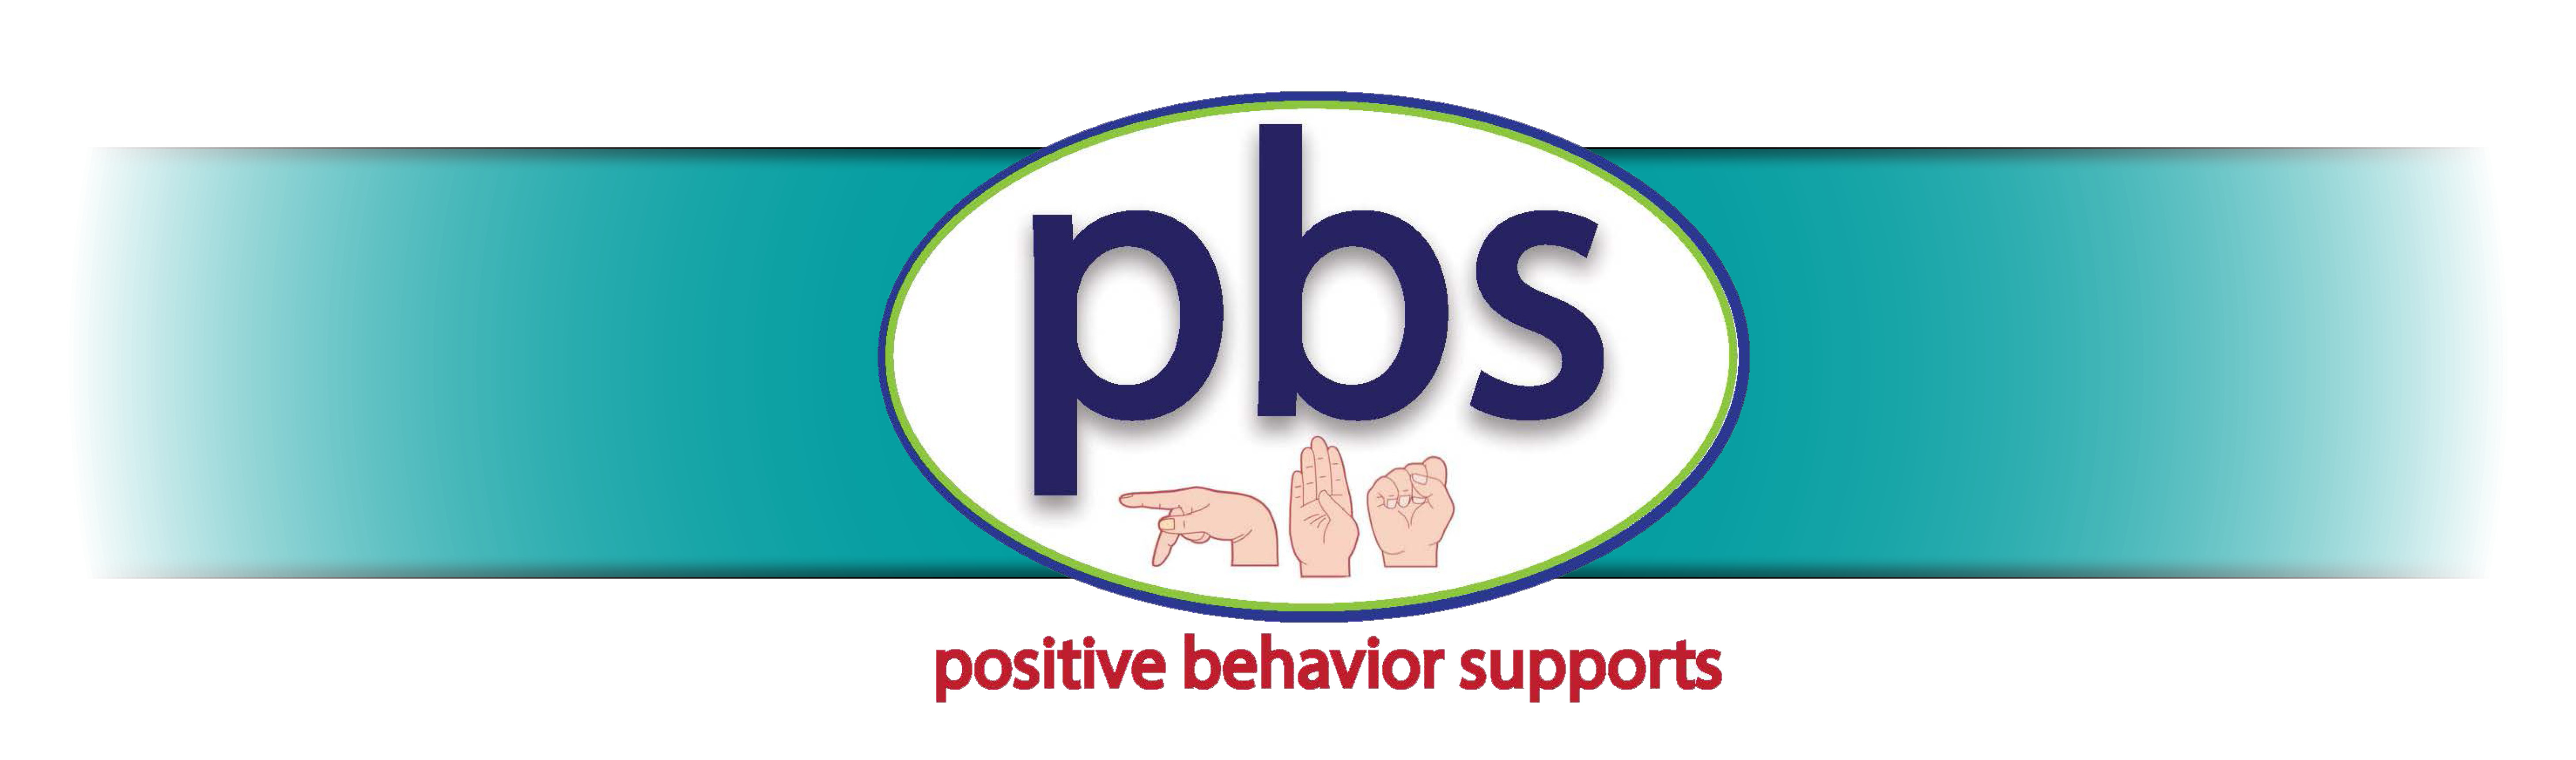 Introduction to Positive Behavior Supports (PBS)